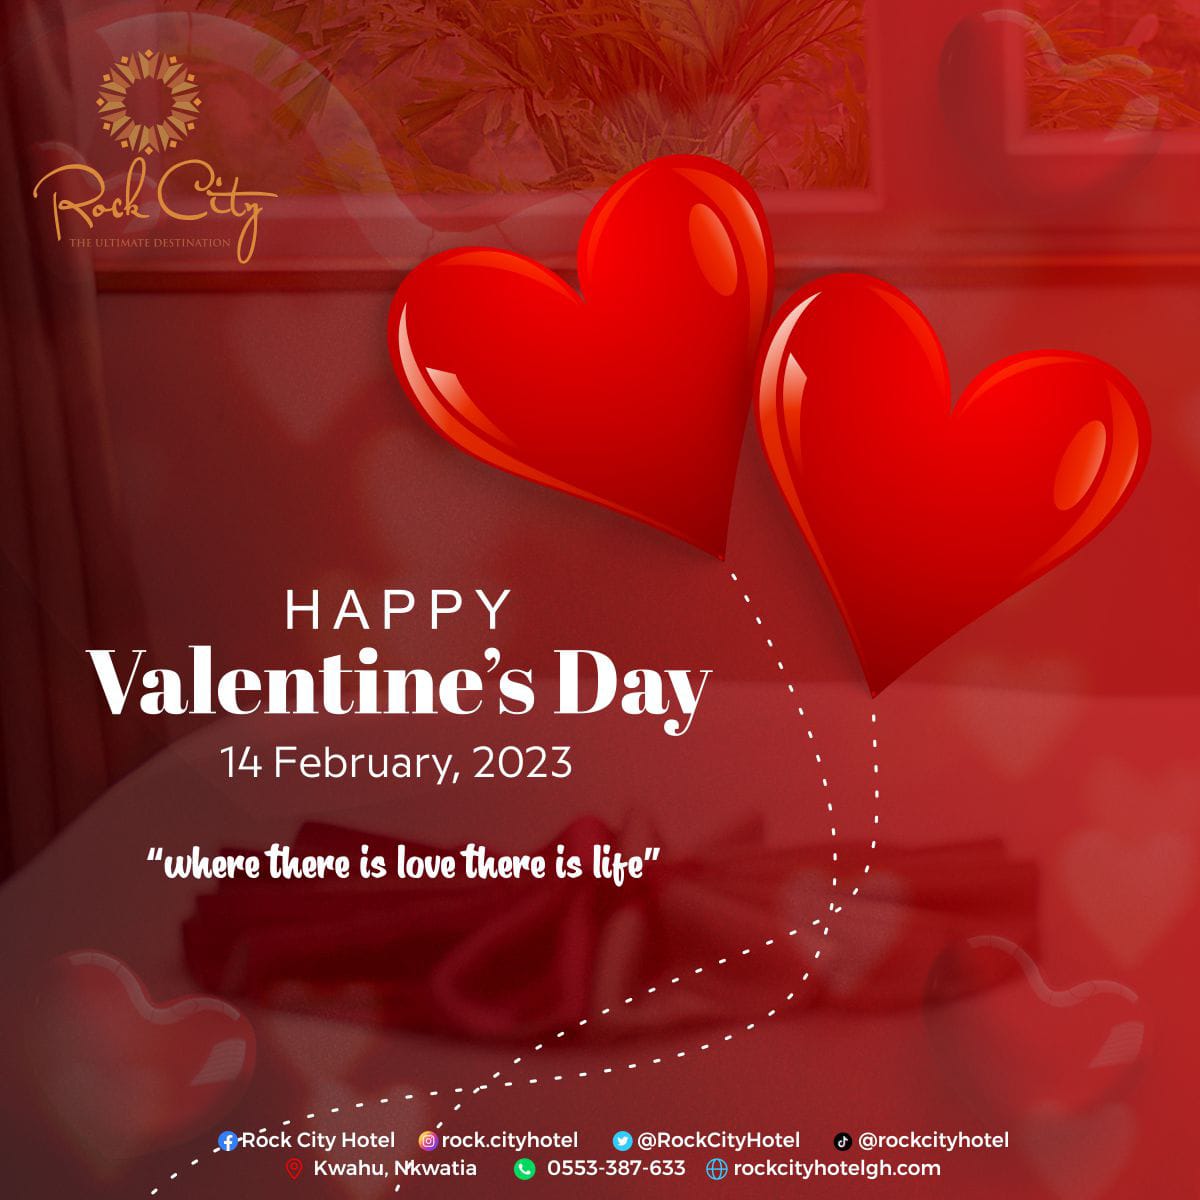 Happy Valentine's Day! At Rock City Hotel, we believe that love is the most important thing in life.
 
#RockCityHotel 
#TheUltimateDestination
#valentinedaygifts #happyvalentine #valentines 

#14february Range Rover WhatsApp